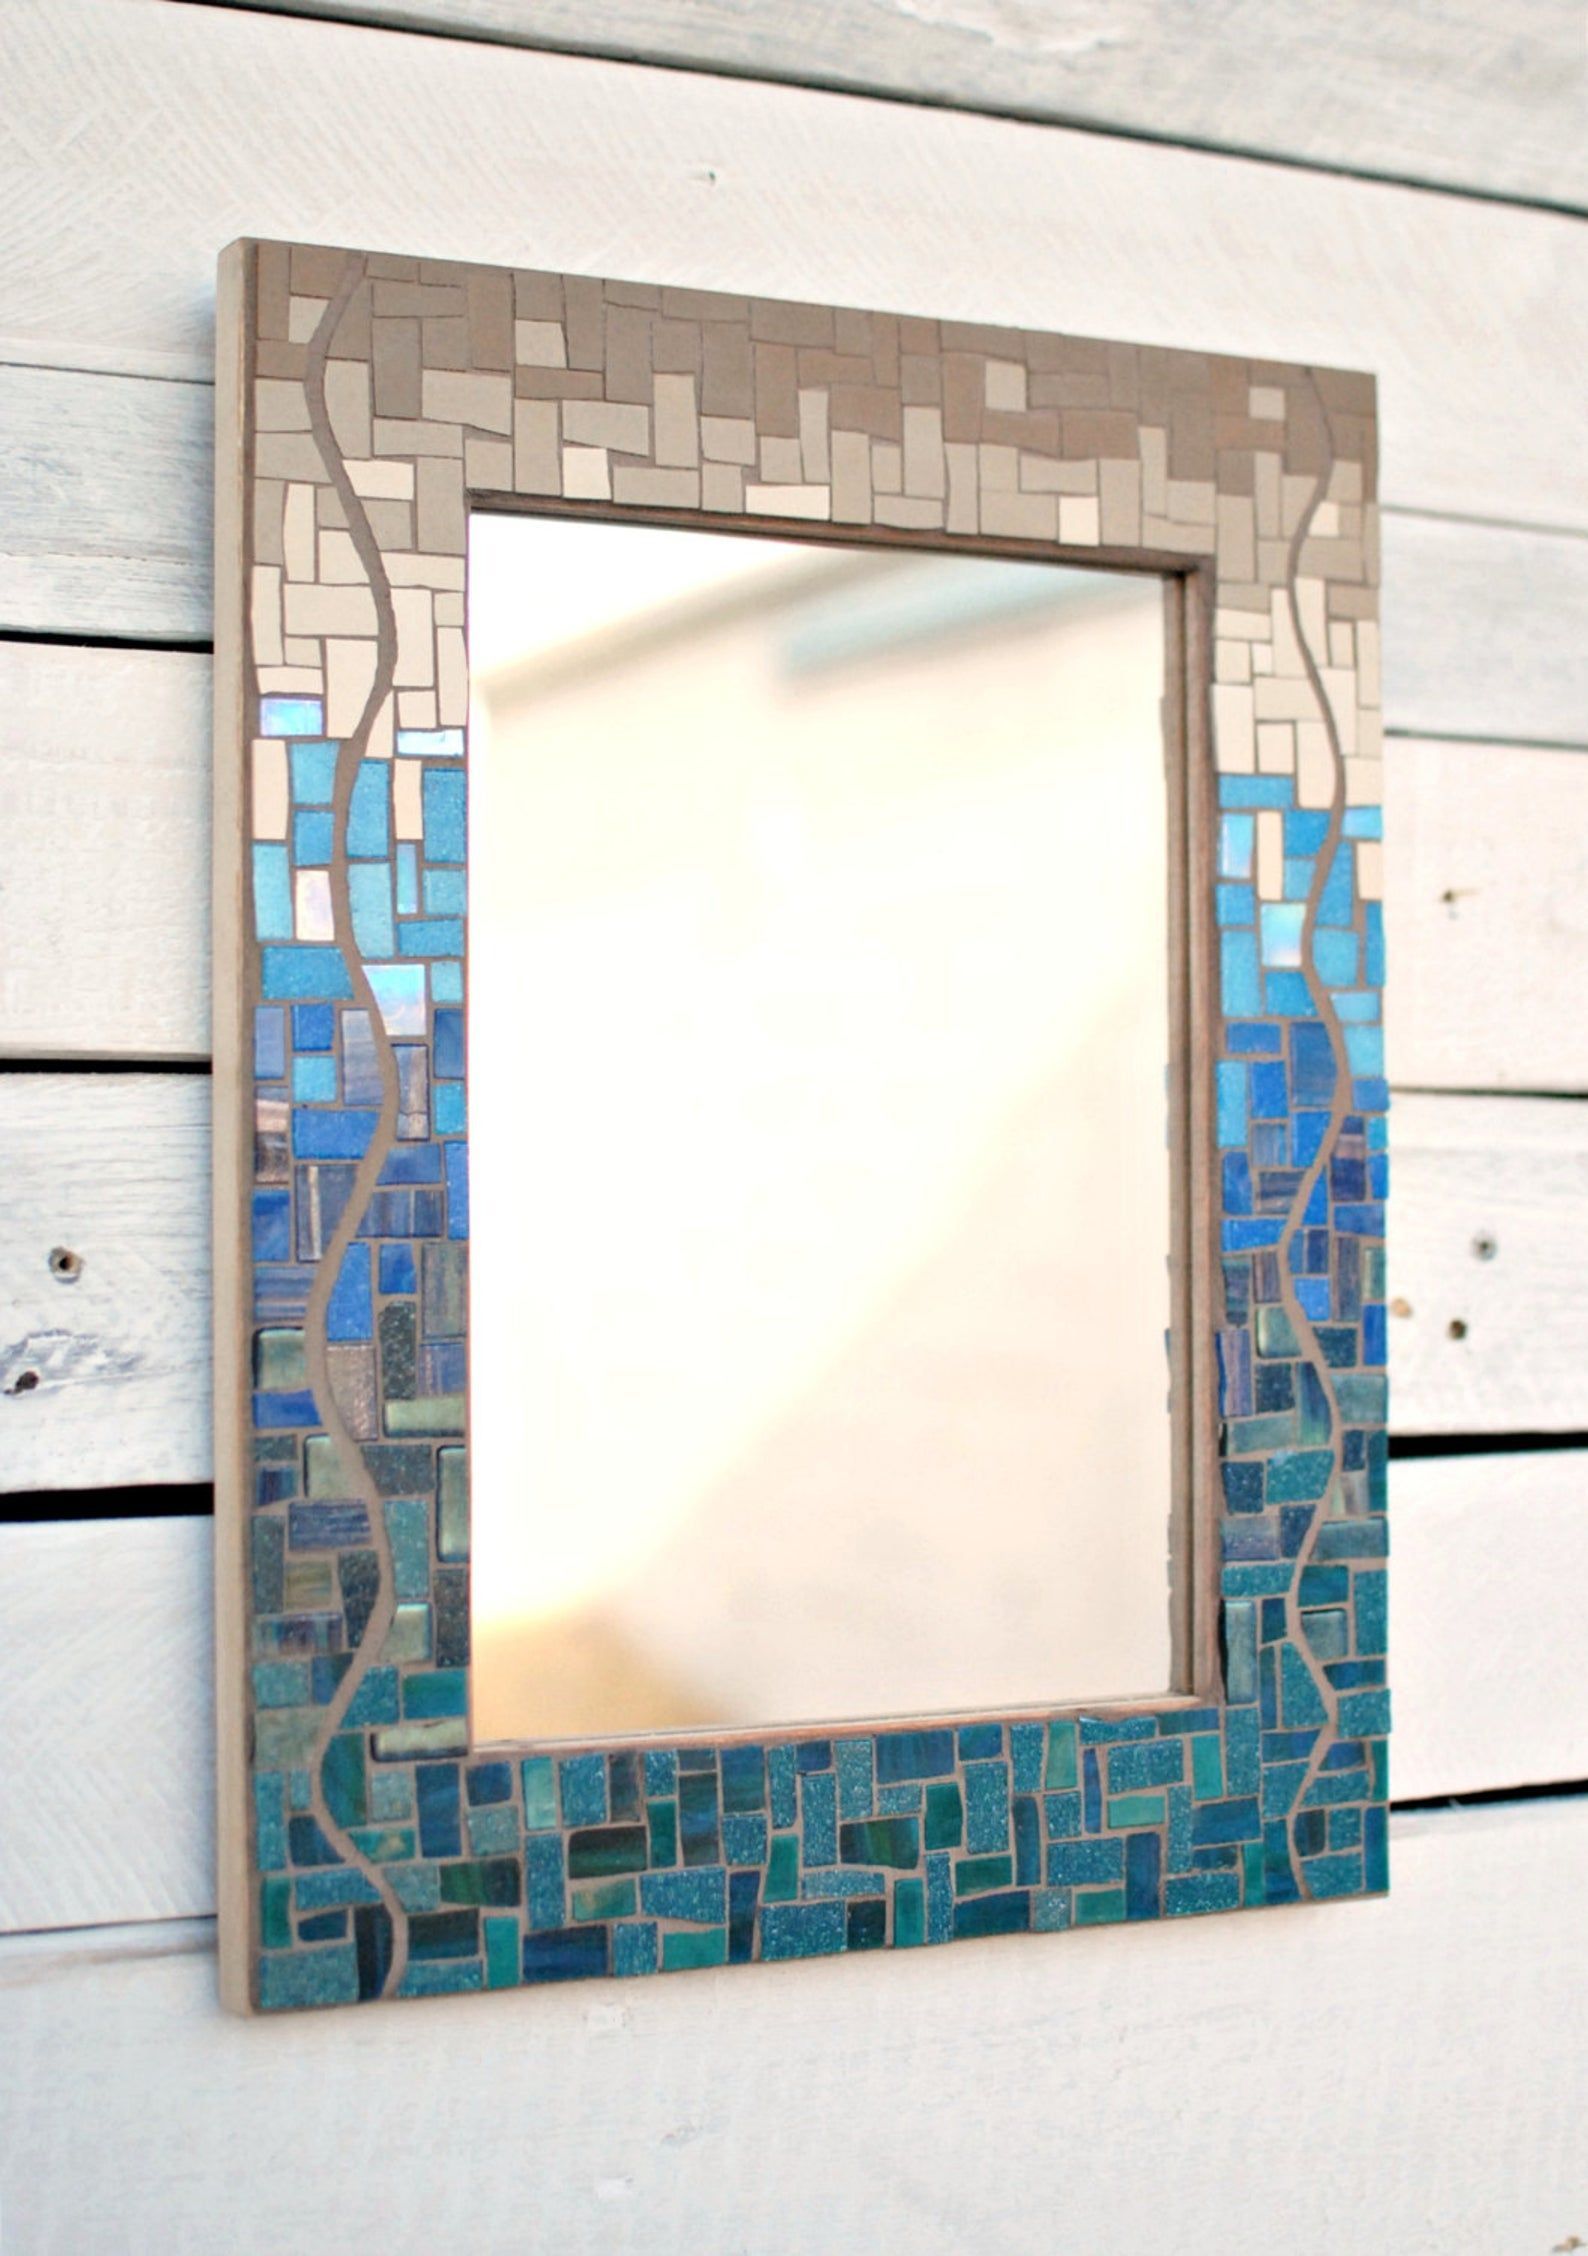 Mosaic Wall Mirror Seaside Gradient Mirror Ready To Ship | Etsy Inside Subtle Blues Art Glass Wall Mirrors (View 3 of 15)